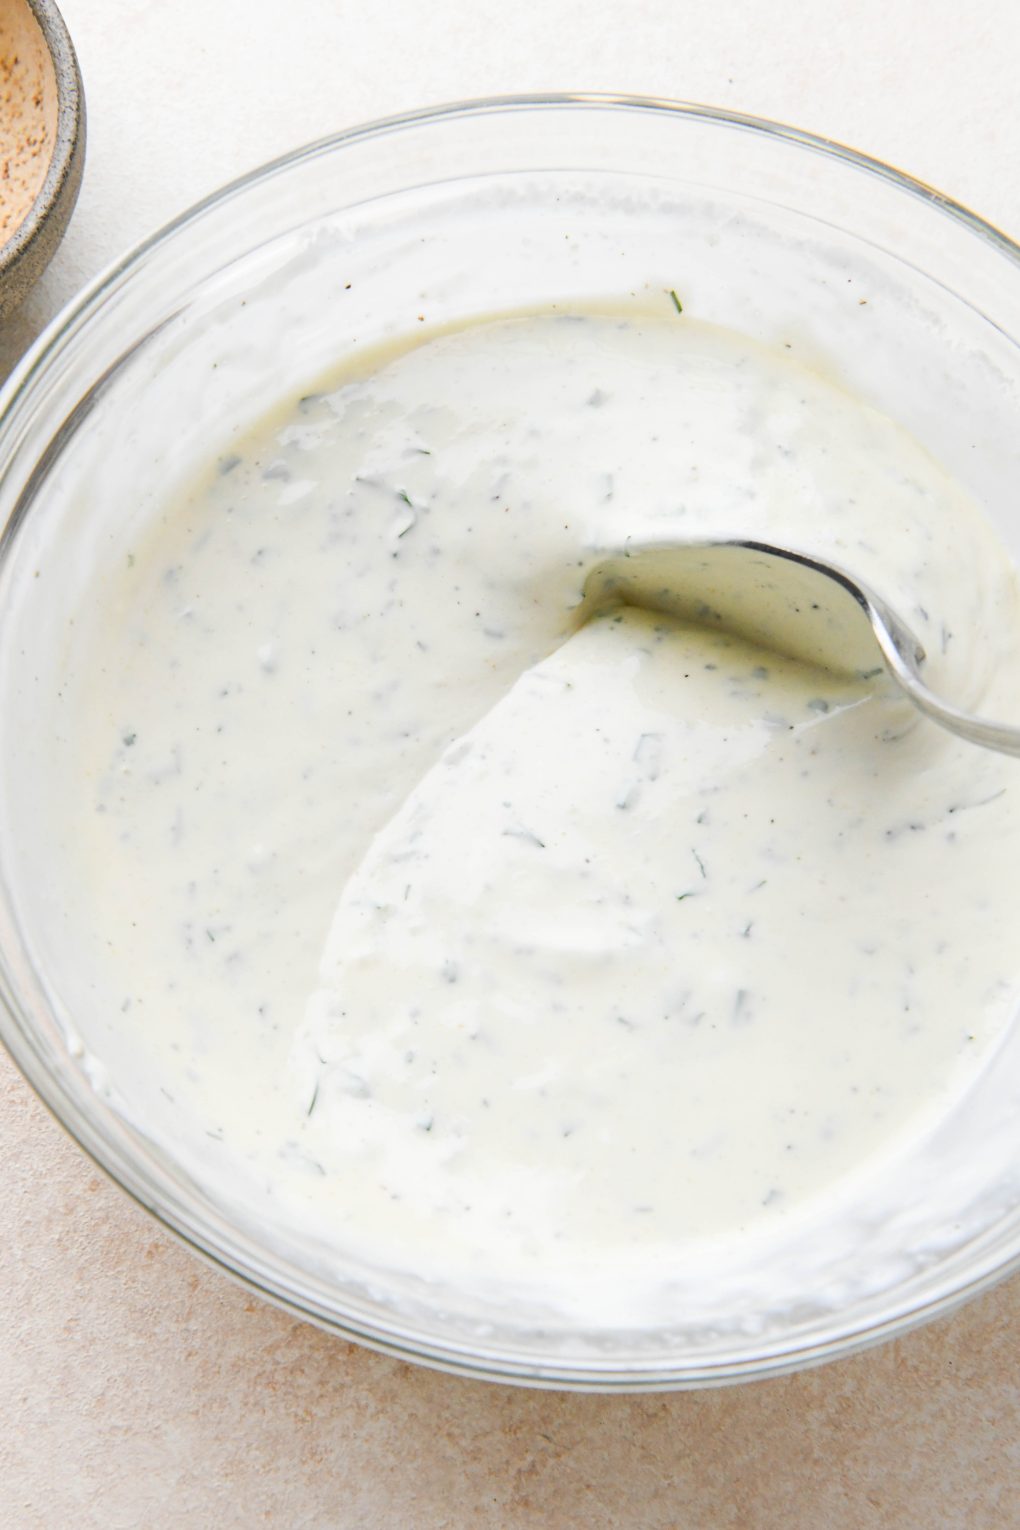 How to make dairy free ranch dressing: A spoon dipping into the bowl of ranch dressing to show consistency.